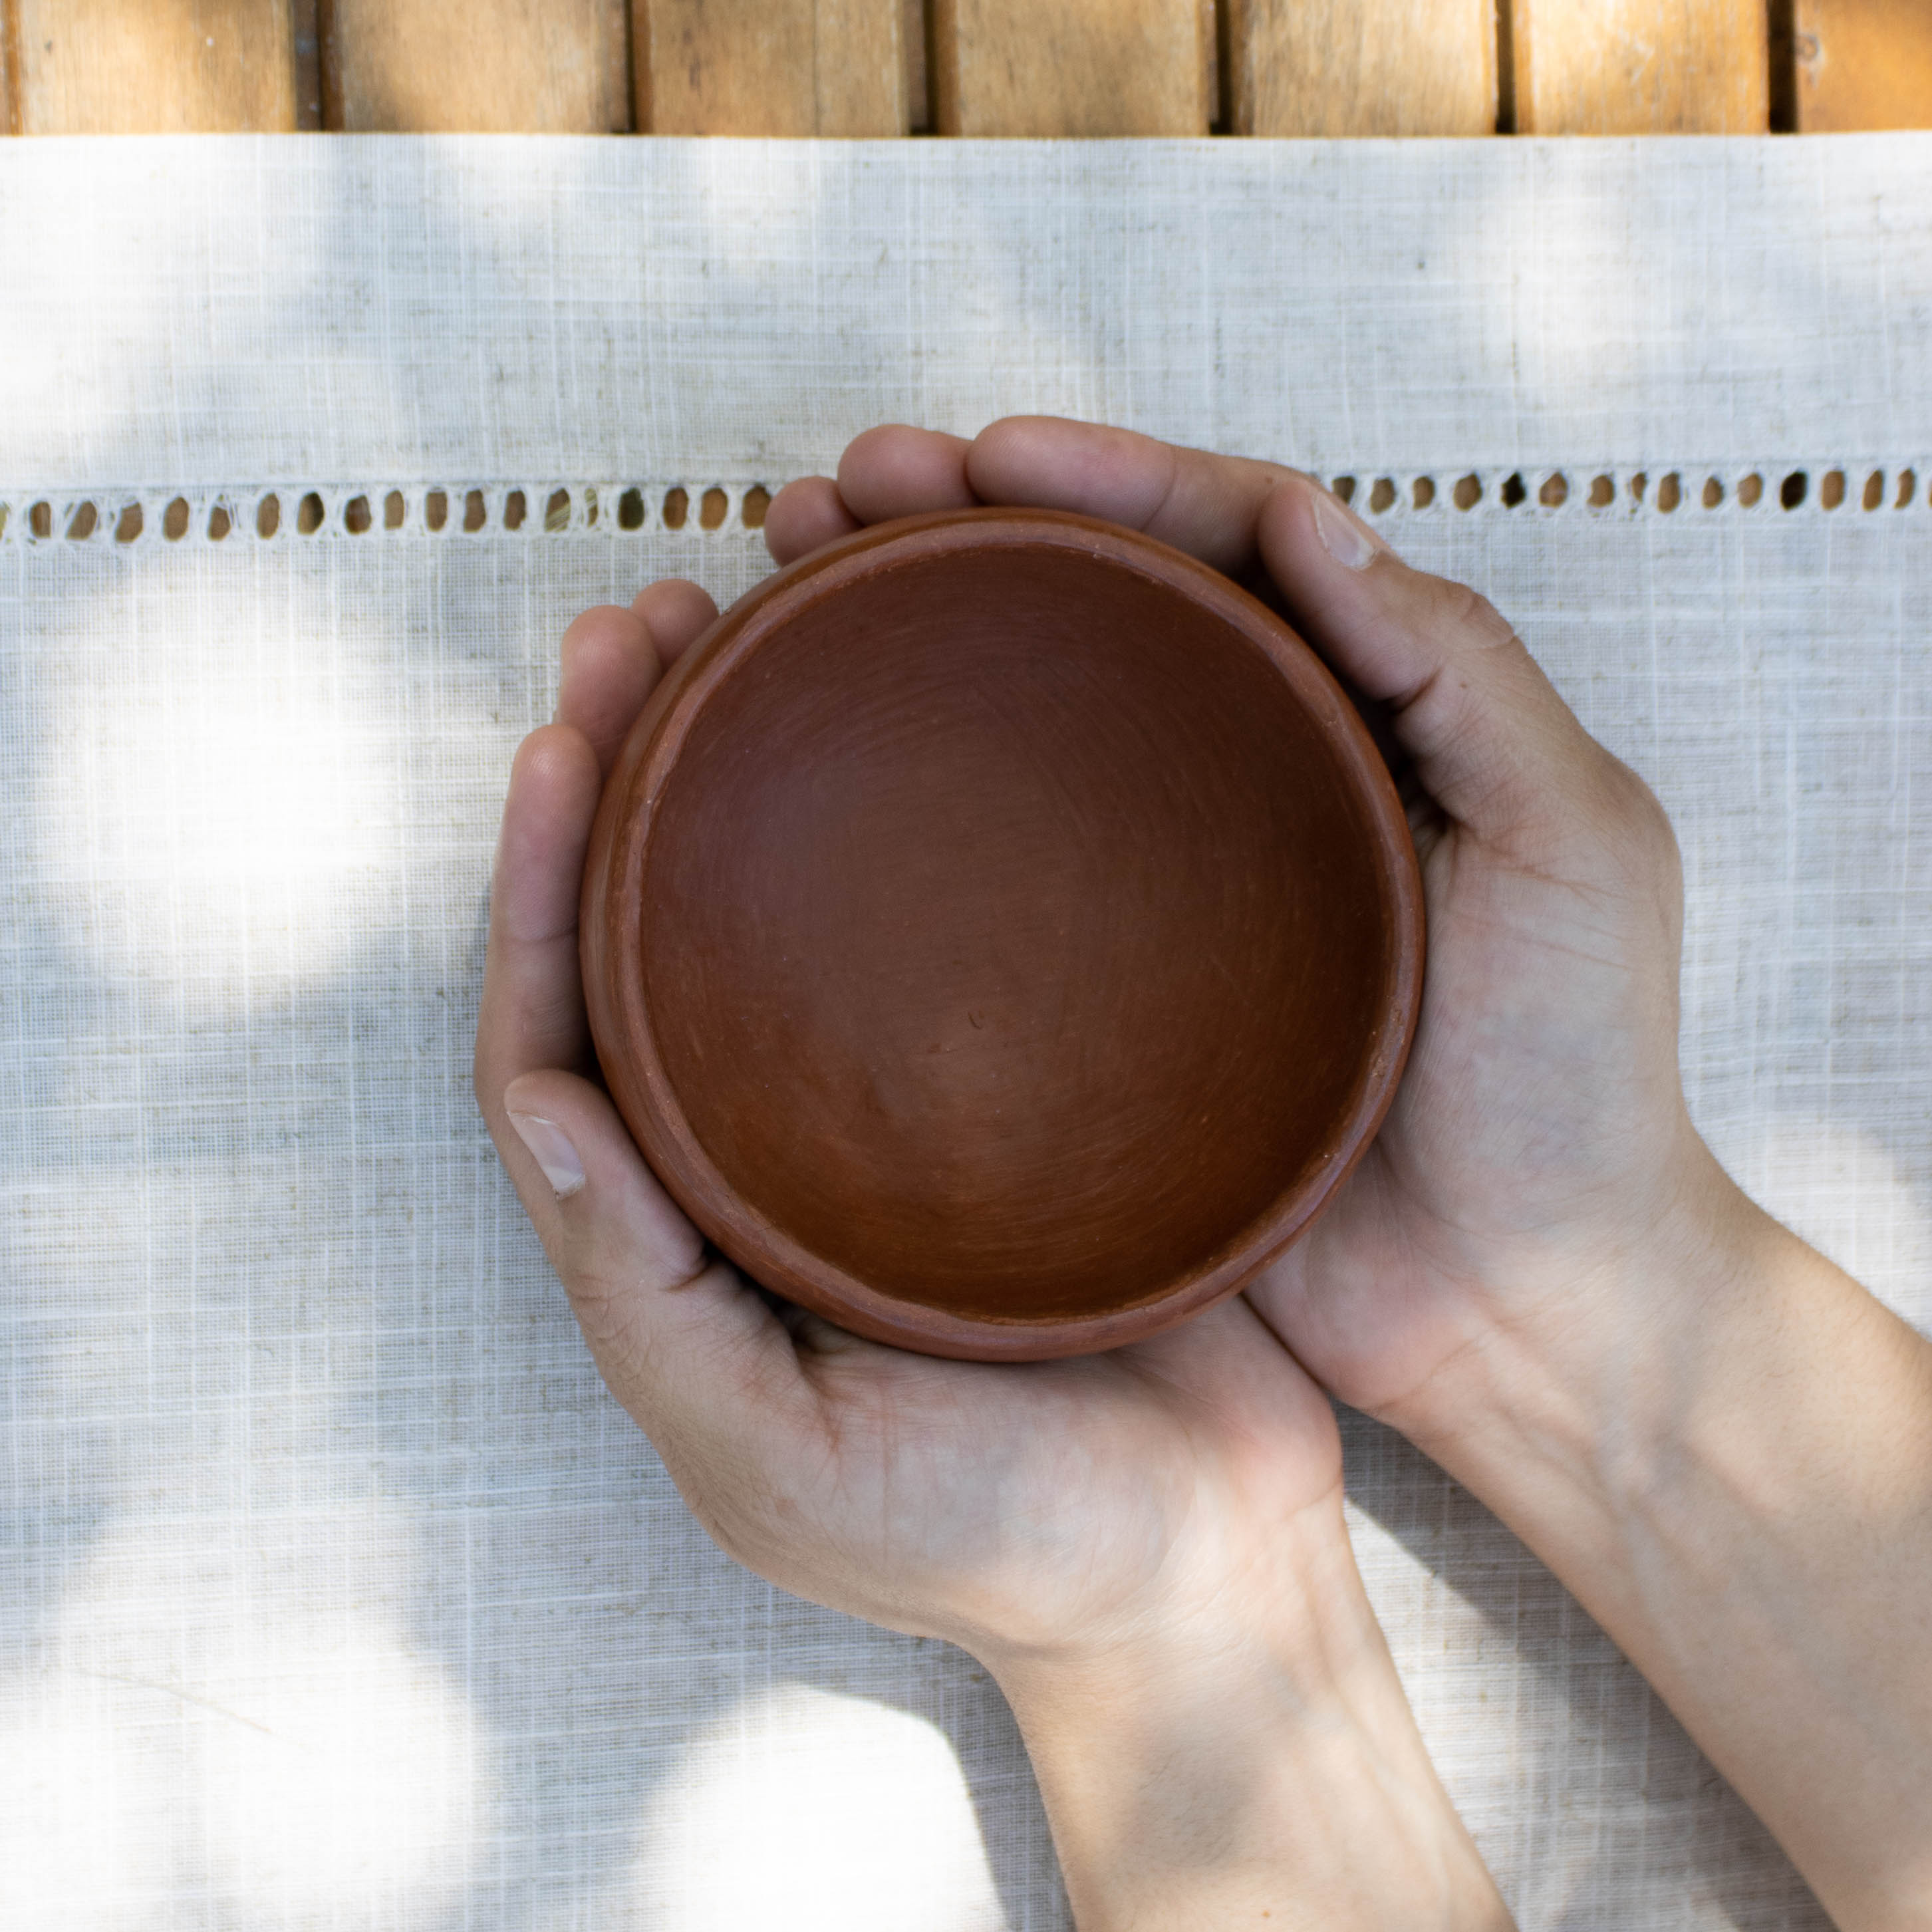 Red Clay Terracotta Small Round Bowl